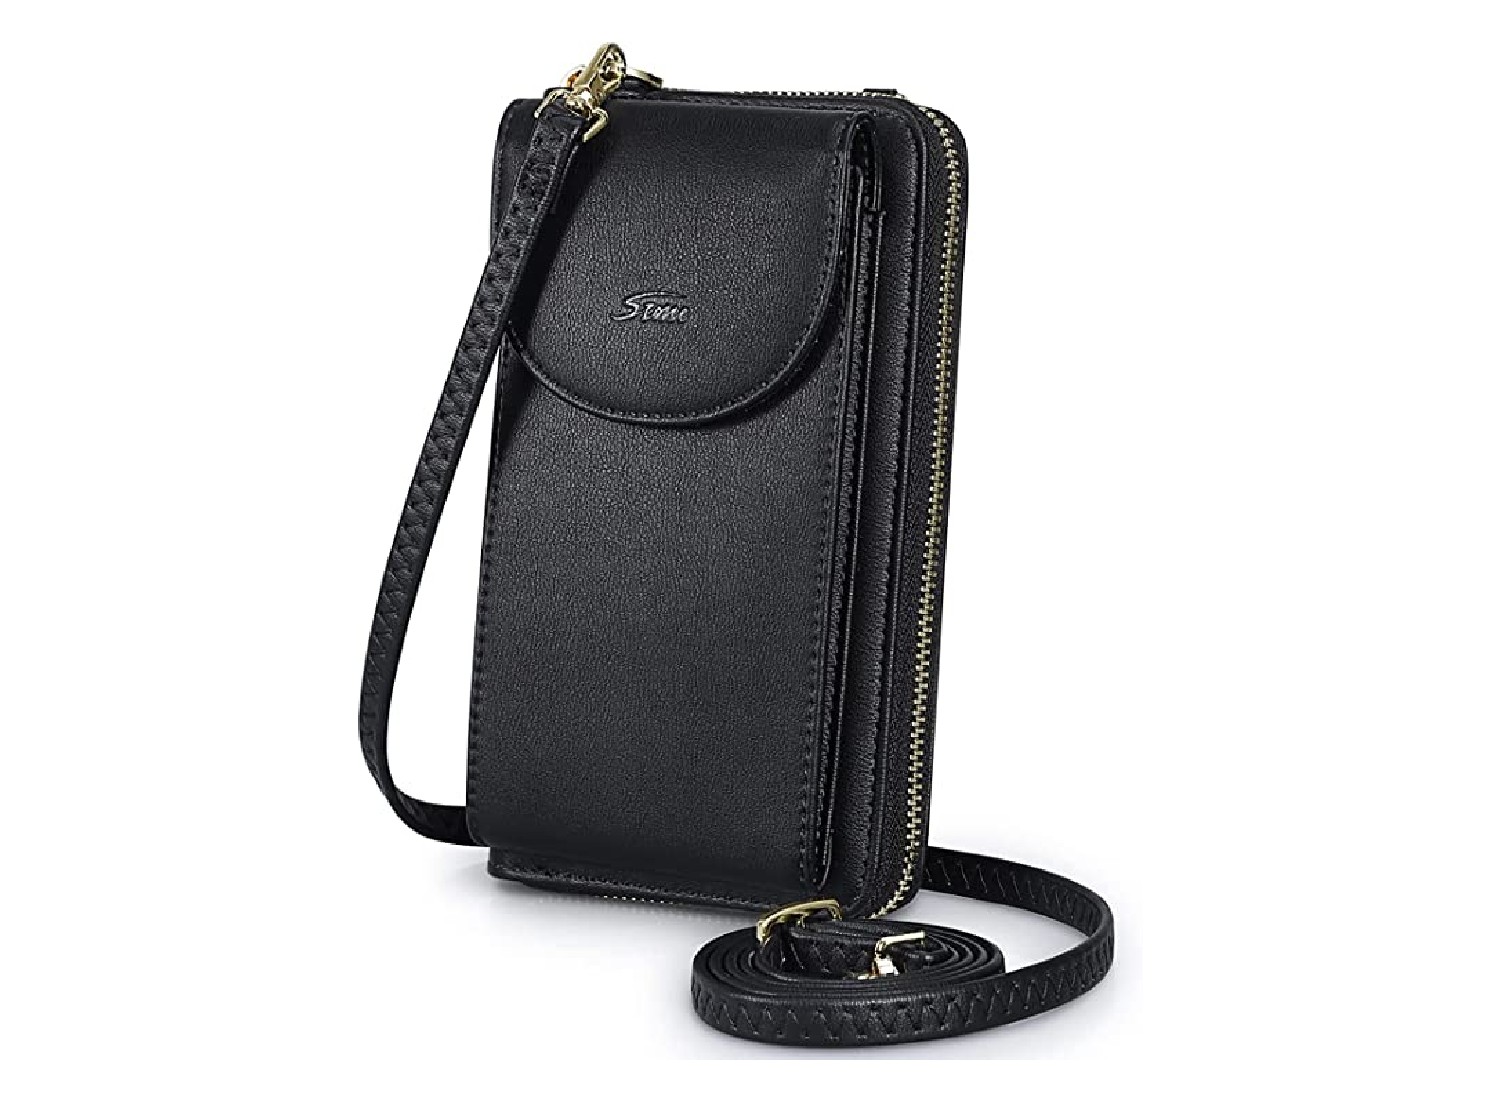 Small Crossbody Cellphone Purse Bag With Shoulder Strap Cute Travel Pouch  Womens Passport Phone Holder